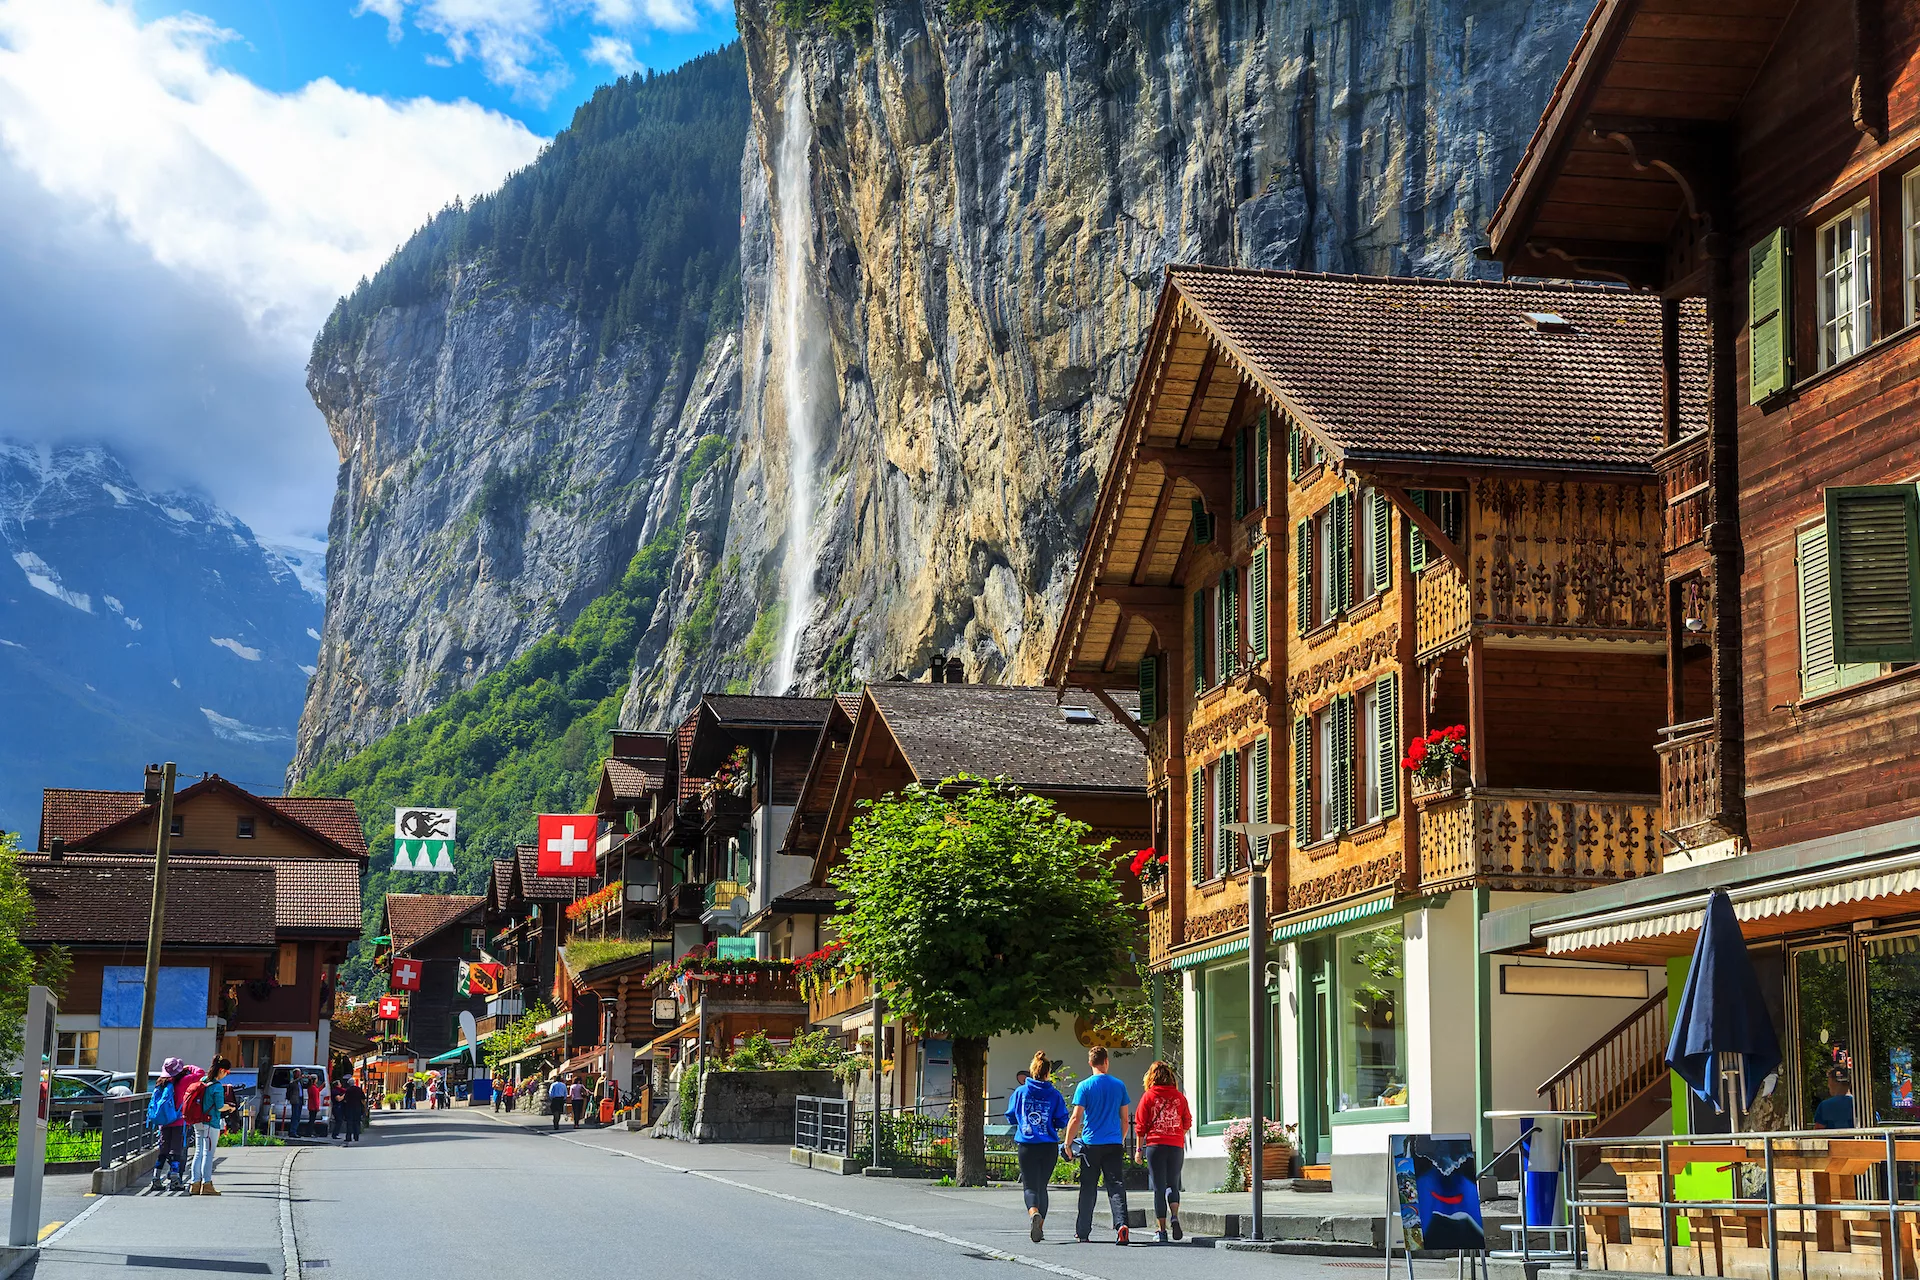 Spectacular principal street of Lauterbrunnen with and stunning Staubbach waterfall in background